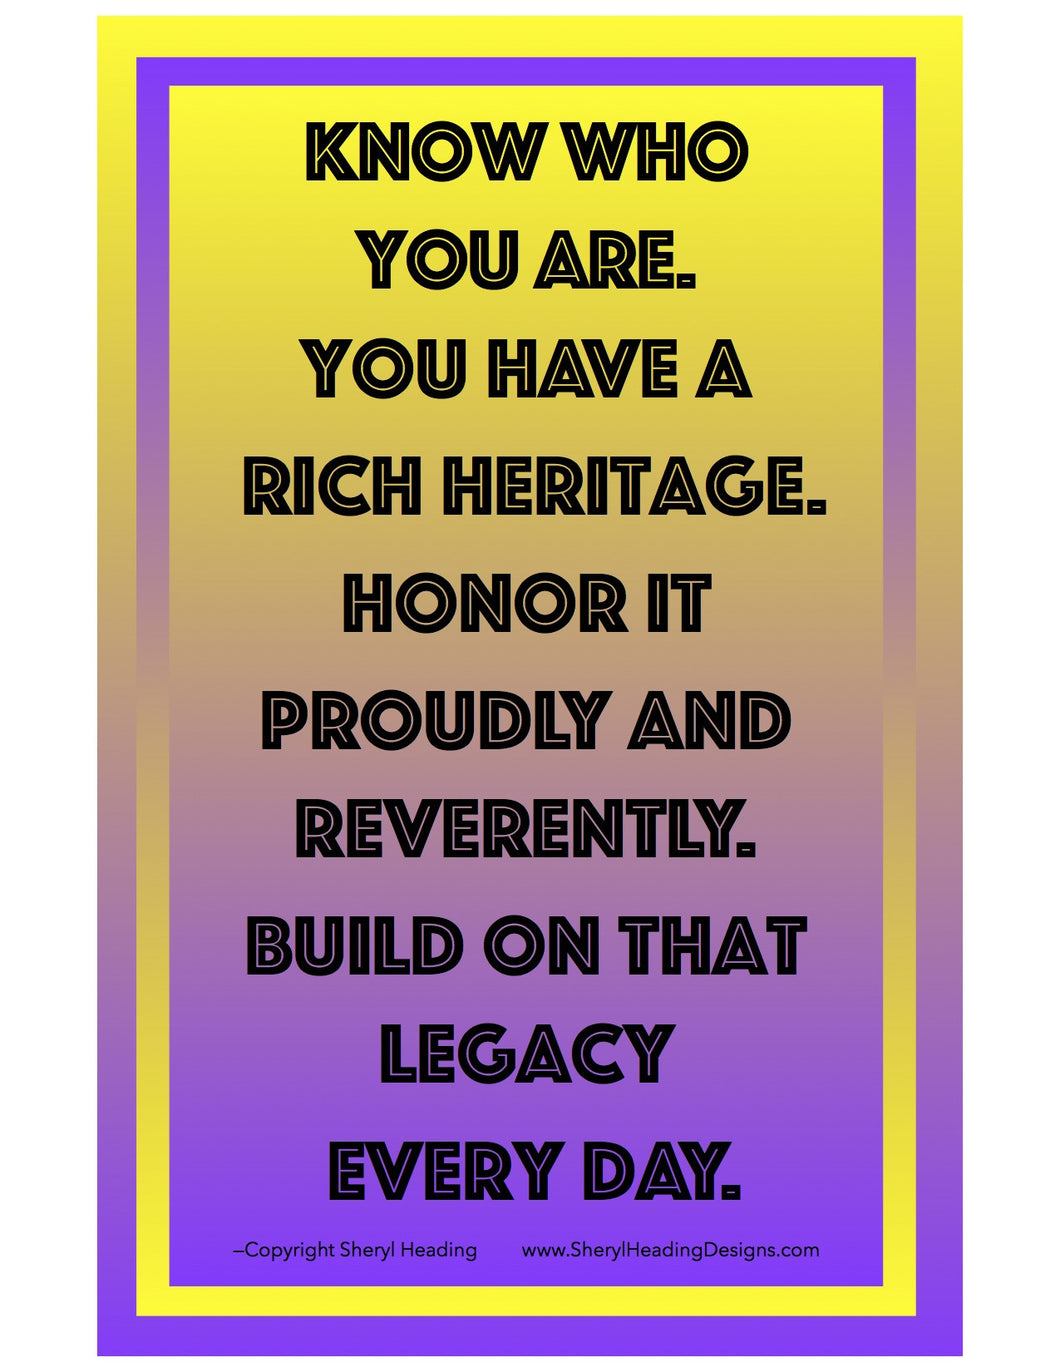 Know Who You Are. You have A Rich Heritage Poster - Sheryl Heading Designs